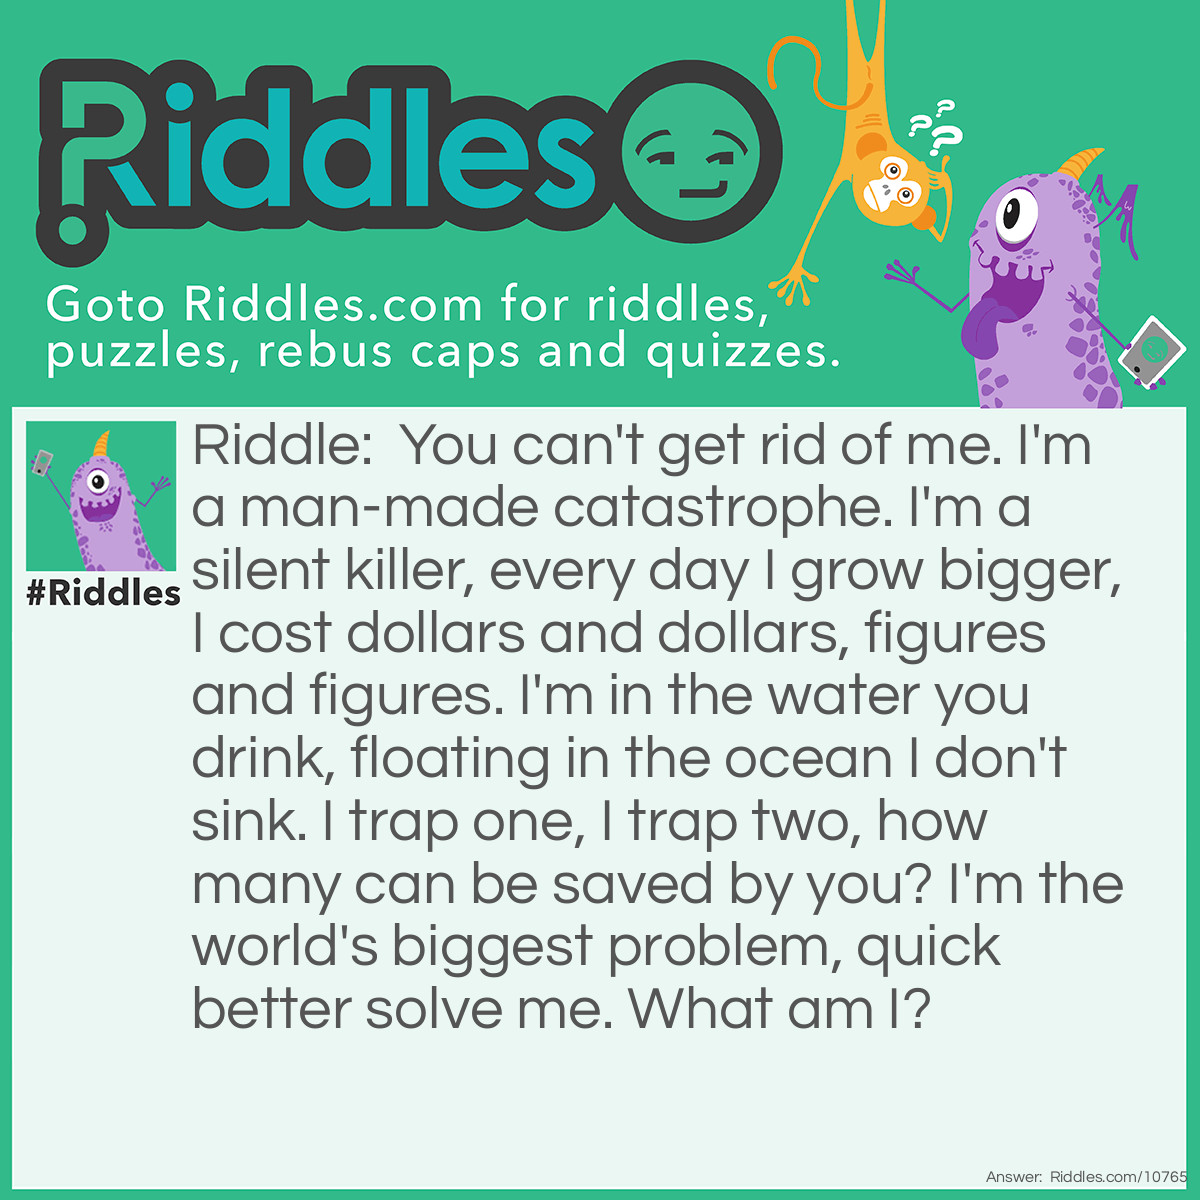 Riddle: You can't get rid of me. I'm a man-made catastrophe. I'm a silent killer, every day I grow bigger, I cost dollars and dollars, figures and figures. I'm in the water you drink, floating in the ocean I don't sink. I trap one, I trap two, how many can be saved by you? I'm the world's biggest problem, quick better solve me. What am I? Answer: Plastic.